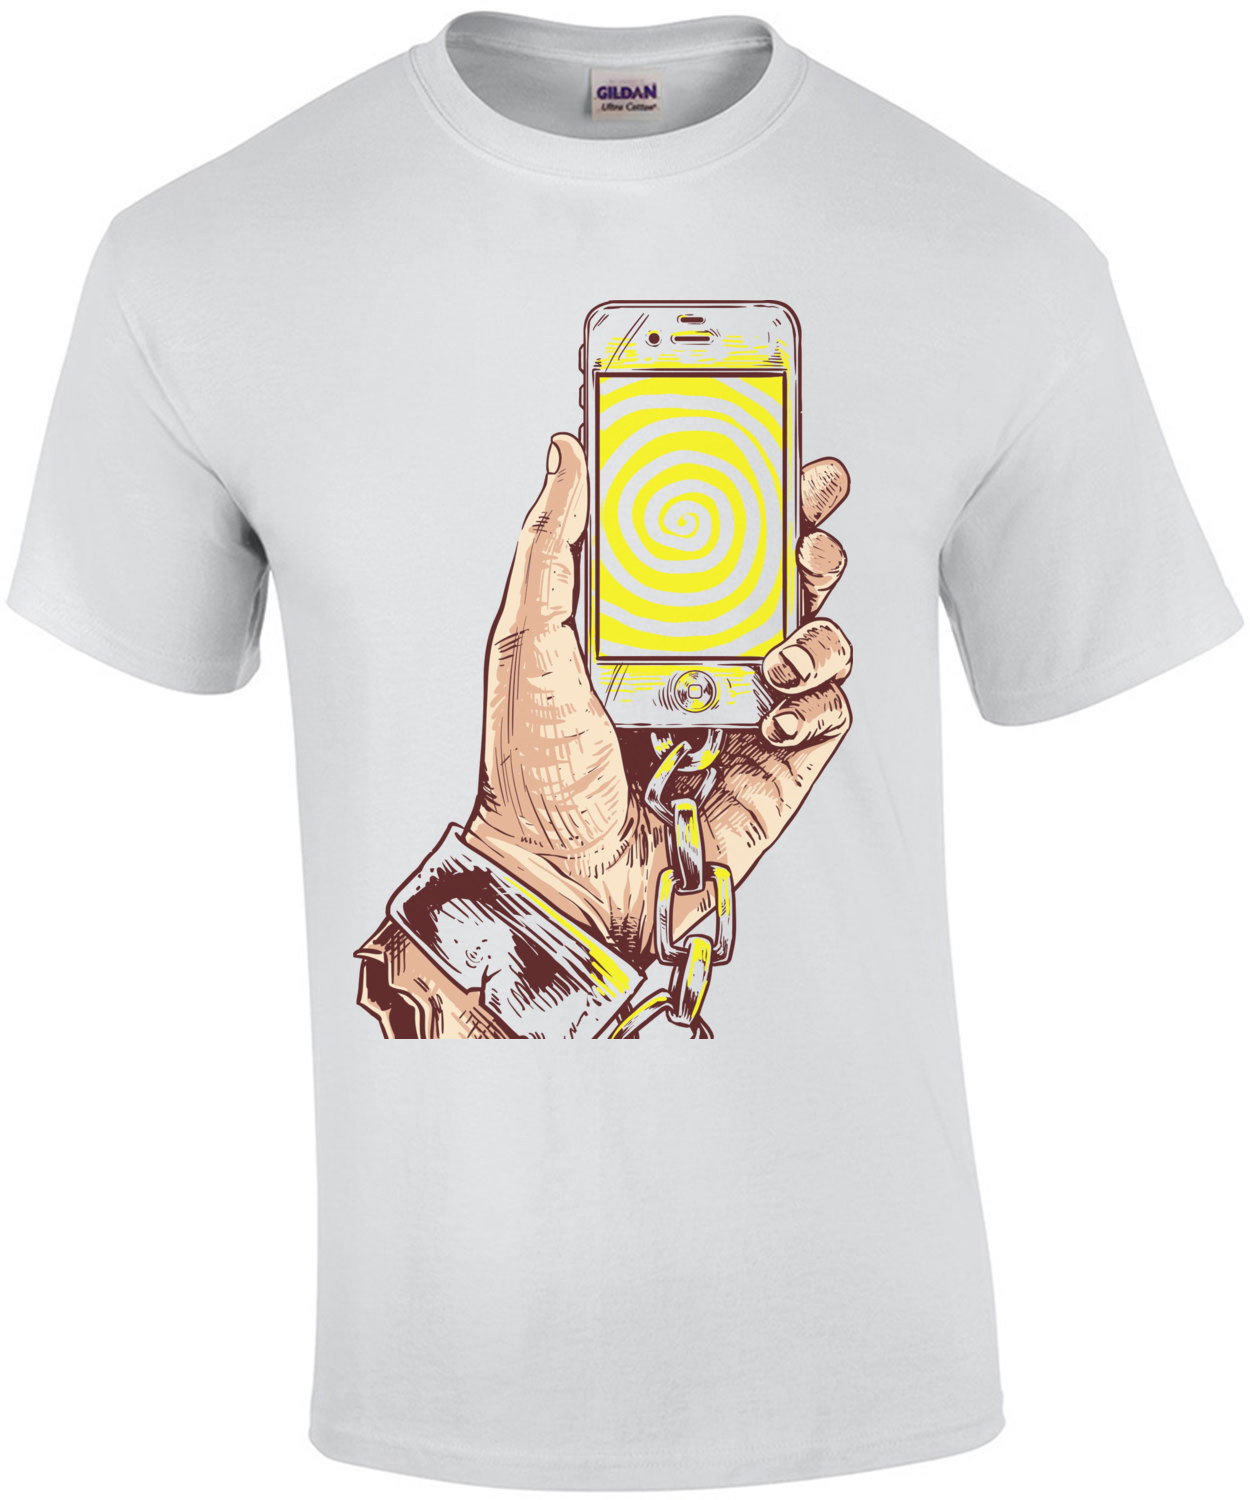 Cell Phone Hand Cuff Surreal Graphic T-Shirt